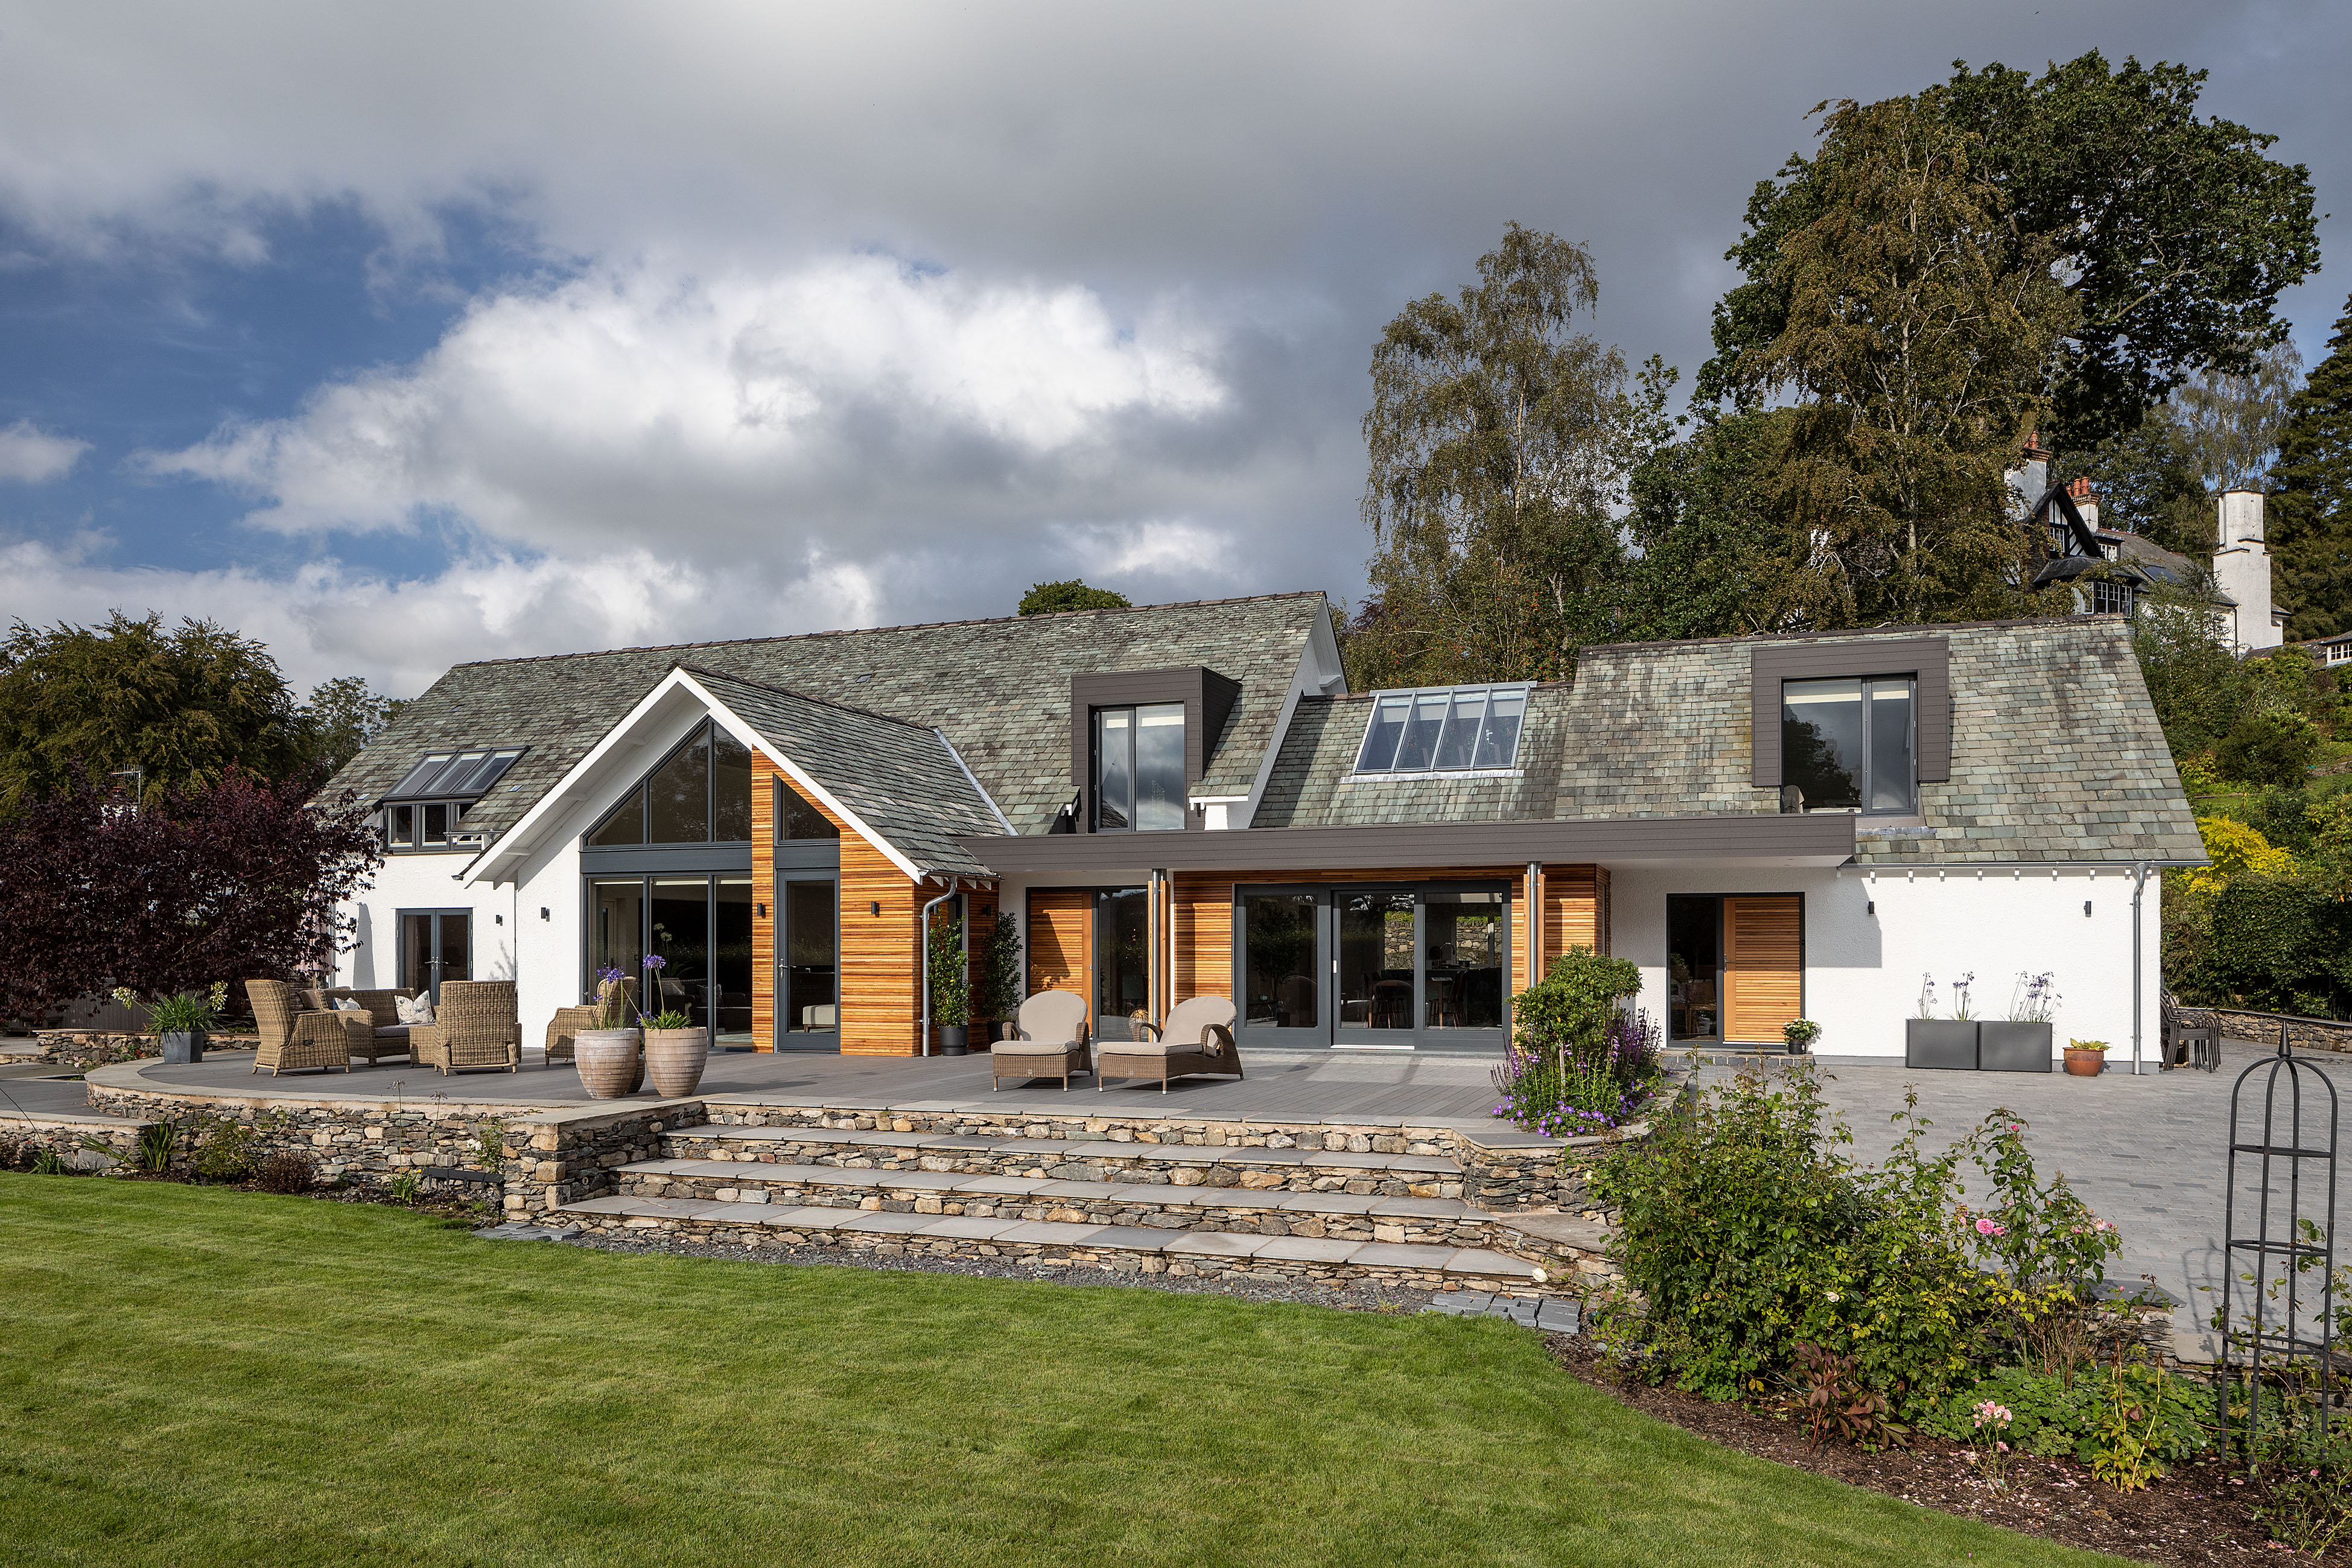 Complete refusrbishment of Windermere House